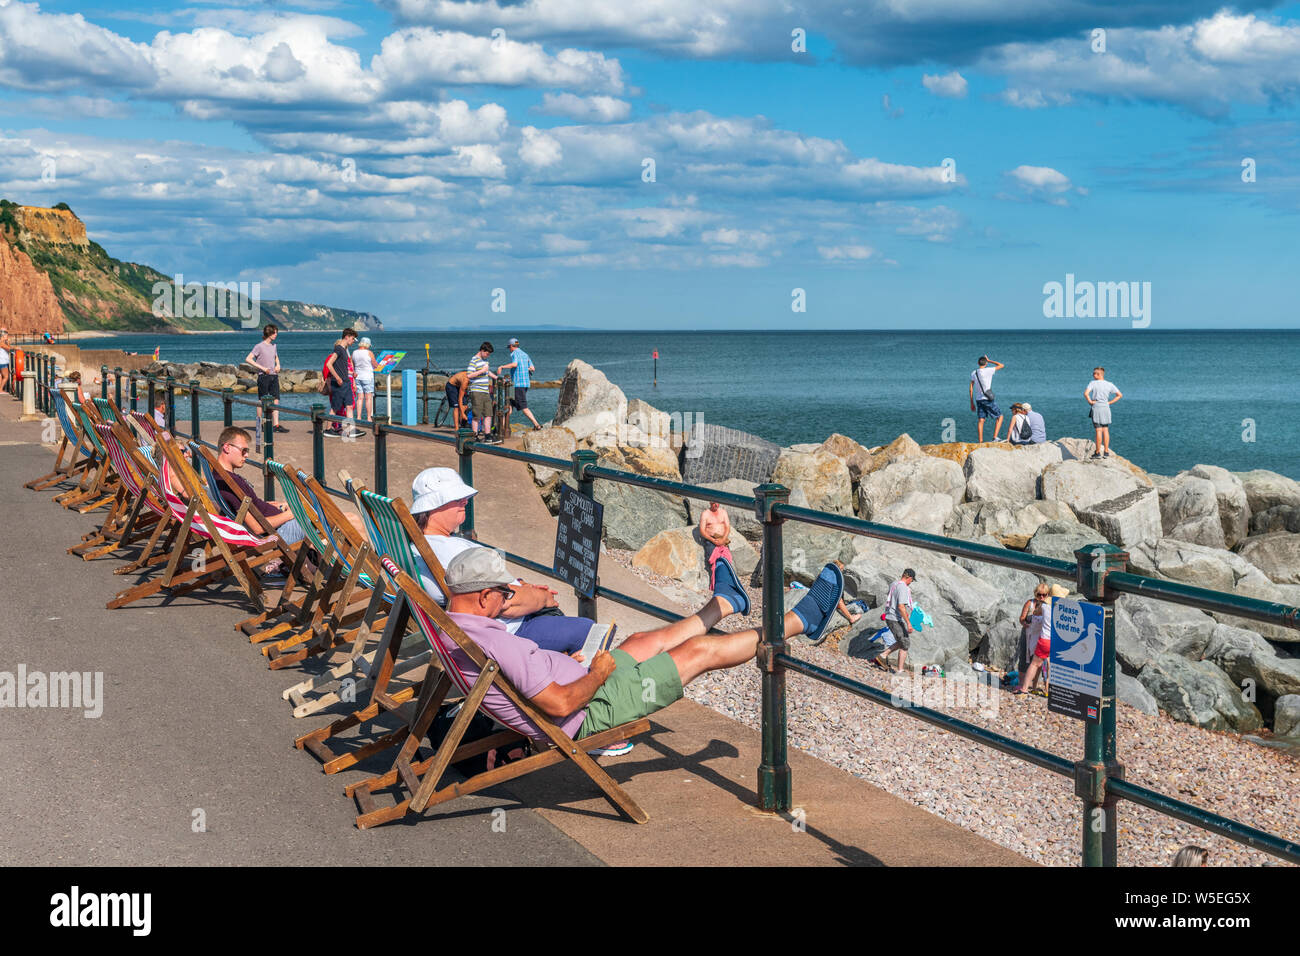 Sidmouth, South Devon, England. Sunday 28th July 2019. UK Weather.  With blue skies and warm sunshine, holidaymakers flock to the south coast town of Stock Photo